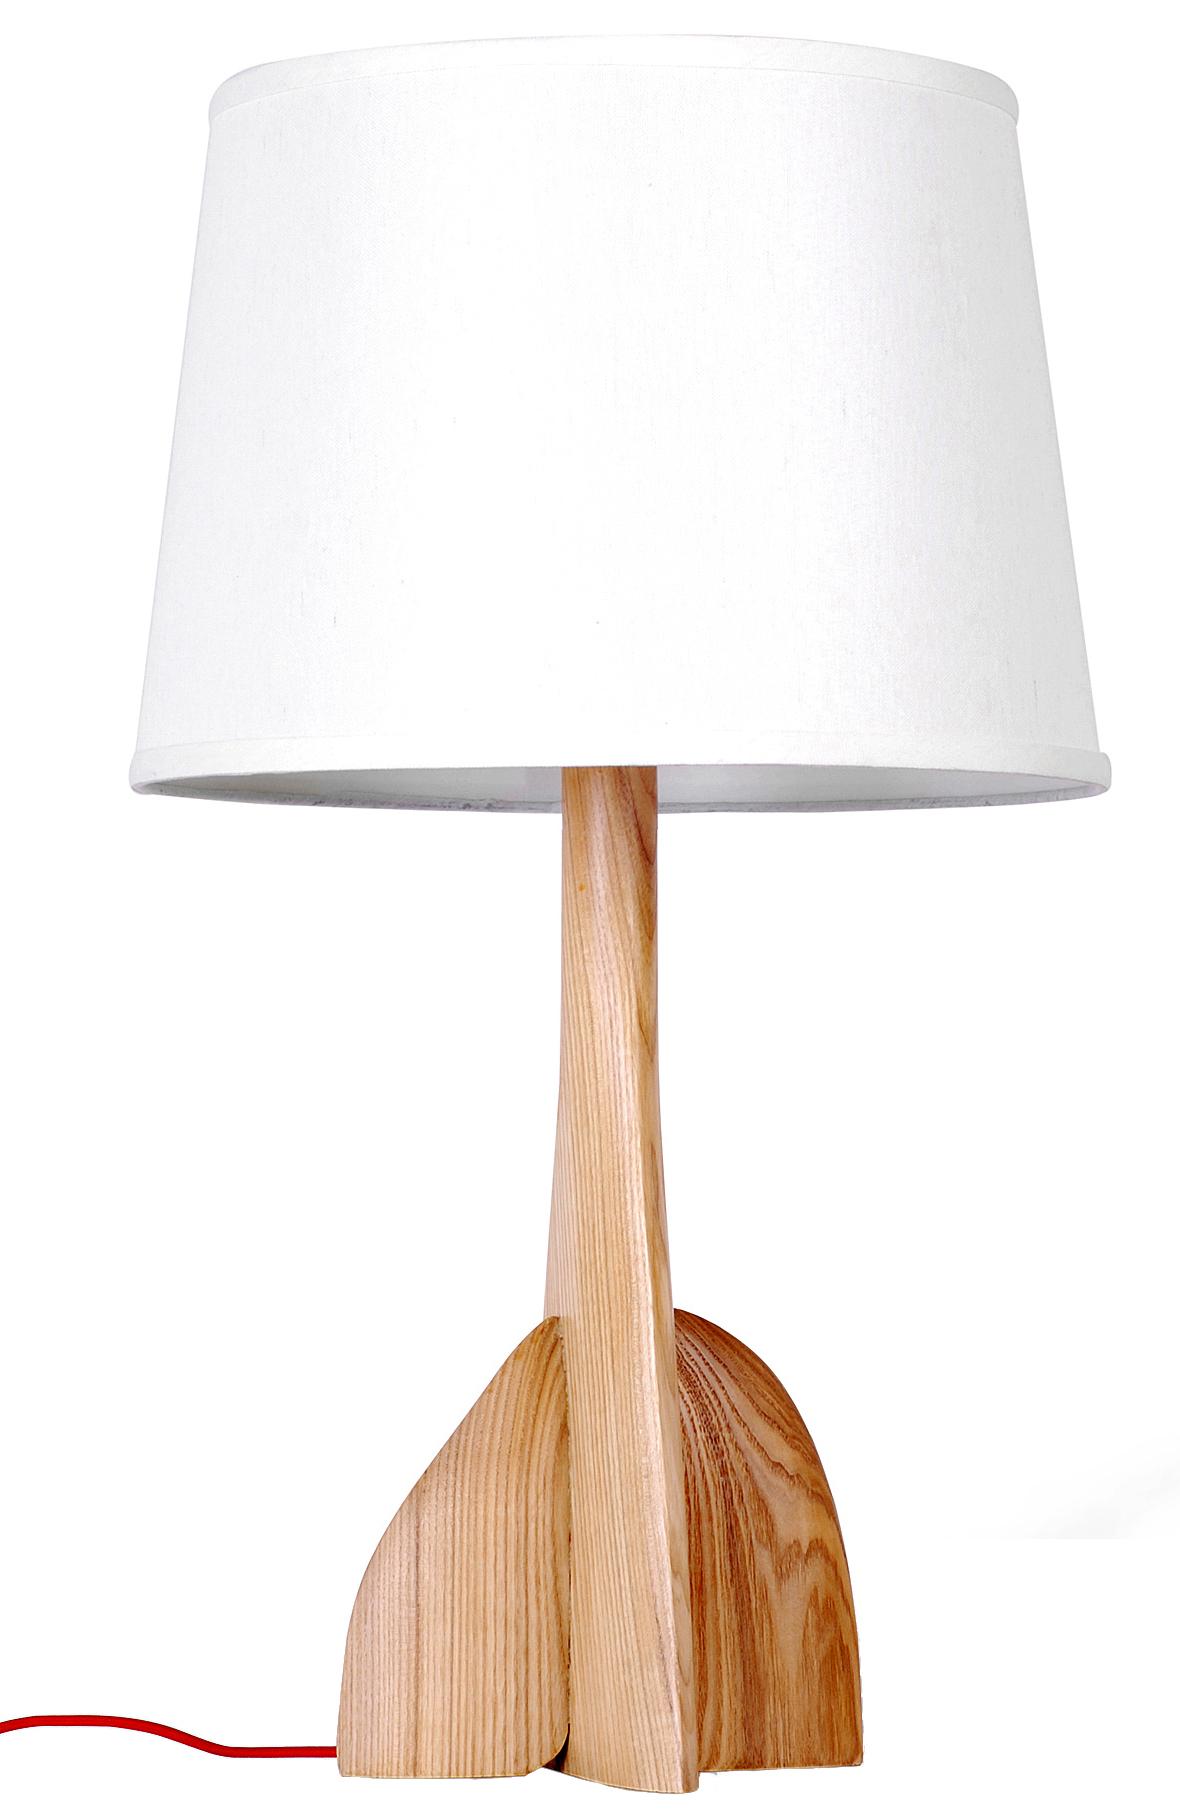 Luxury wooden home decorative table lamp